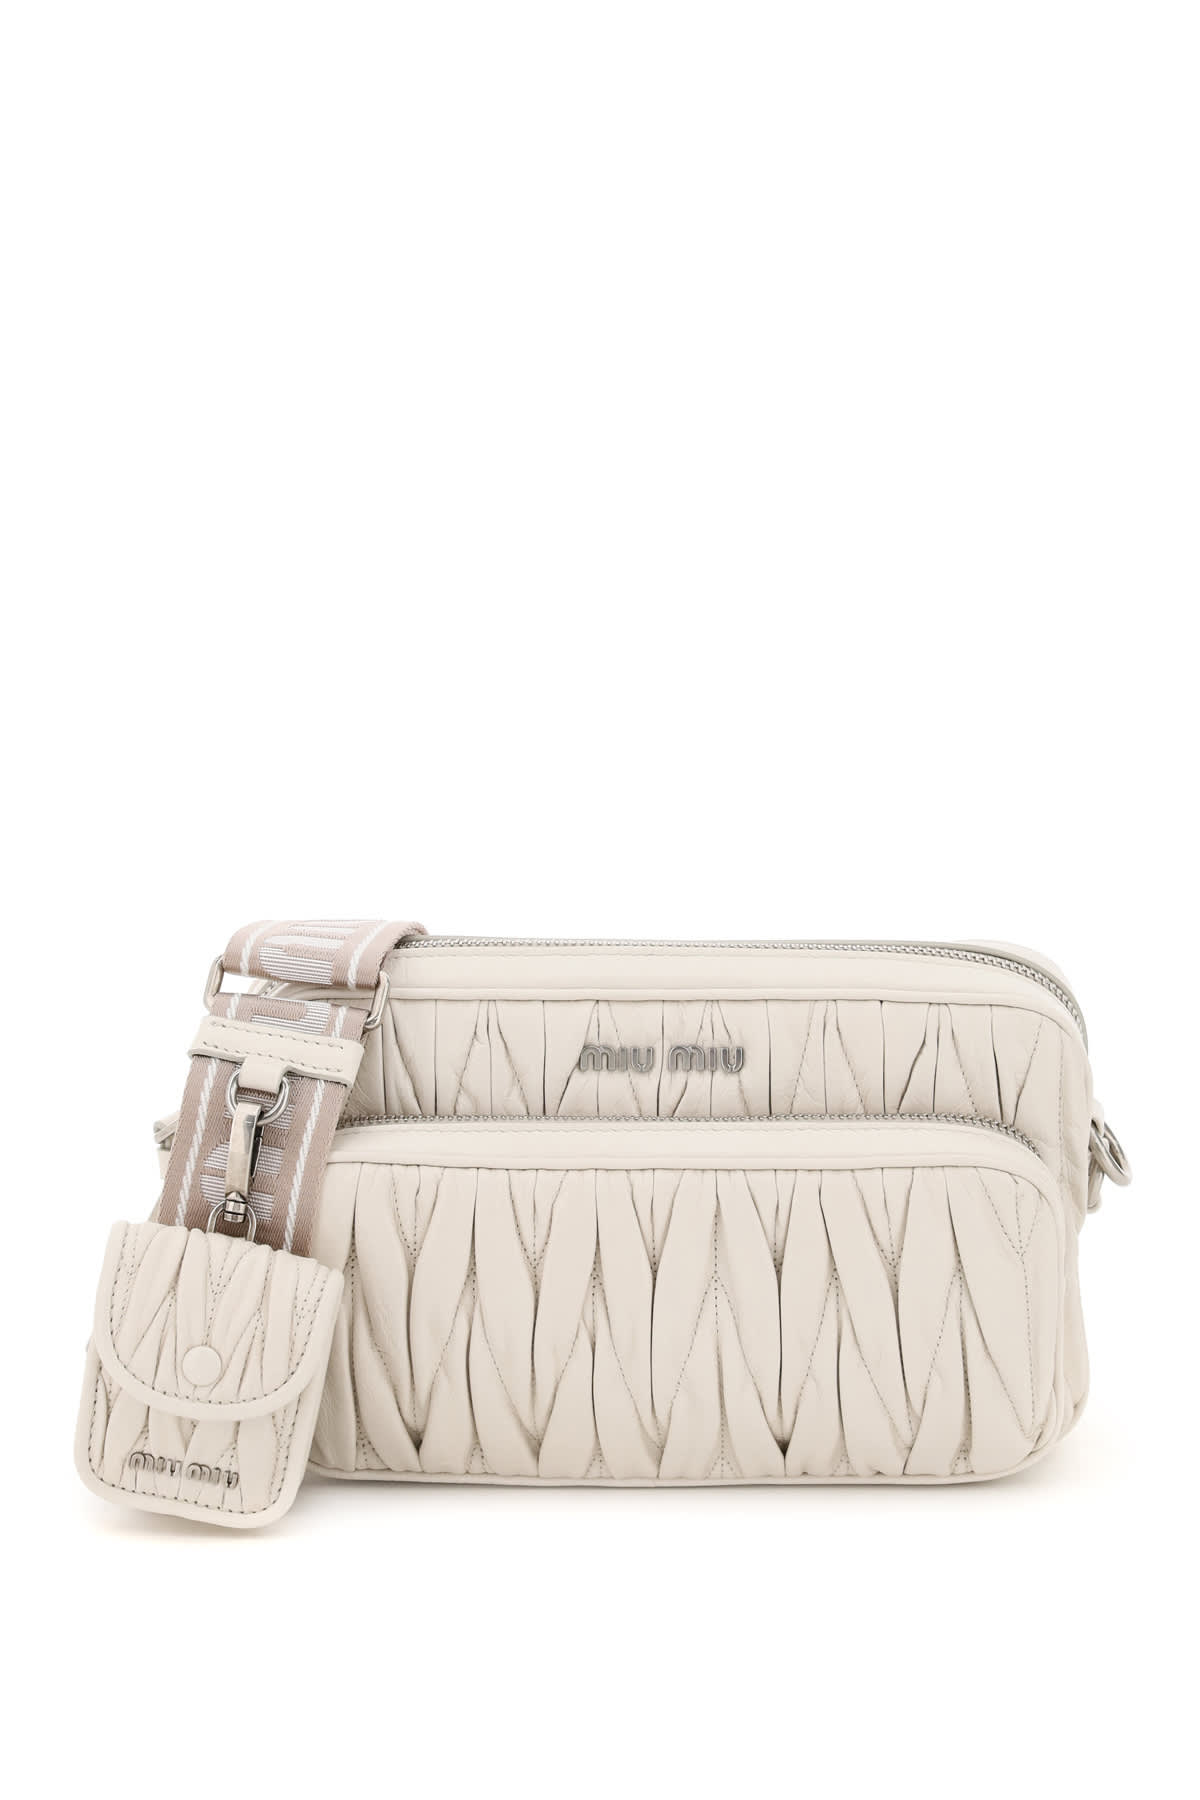 Miu Miu QUILTED CAMERA BAG WITH POUCH